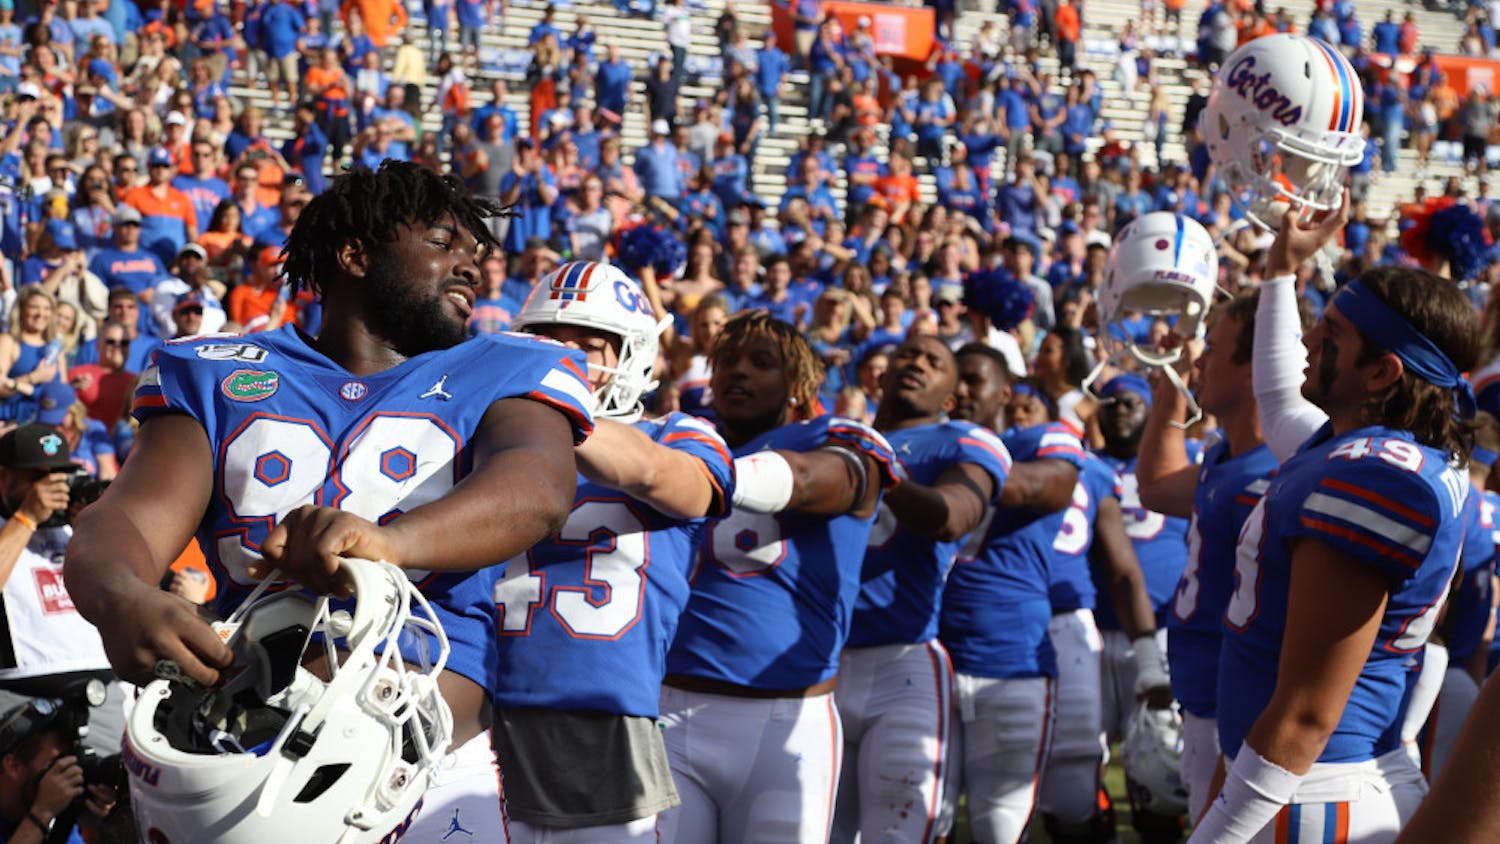 The Gators celebrating a home win against Vanderbilt last season. In Saturday's opening kickoff, the Gators and Rebels displayed their support of the Black Lives Matter movement.